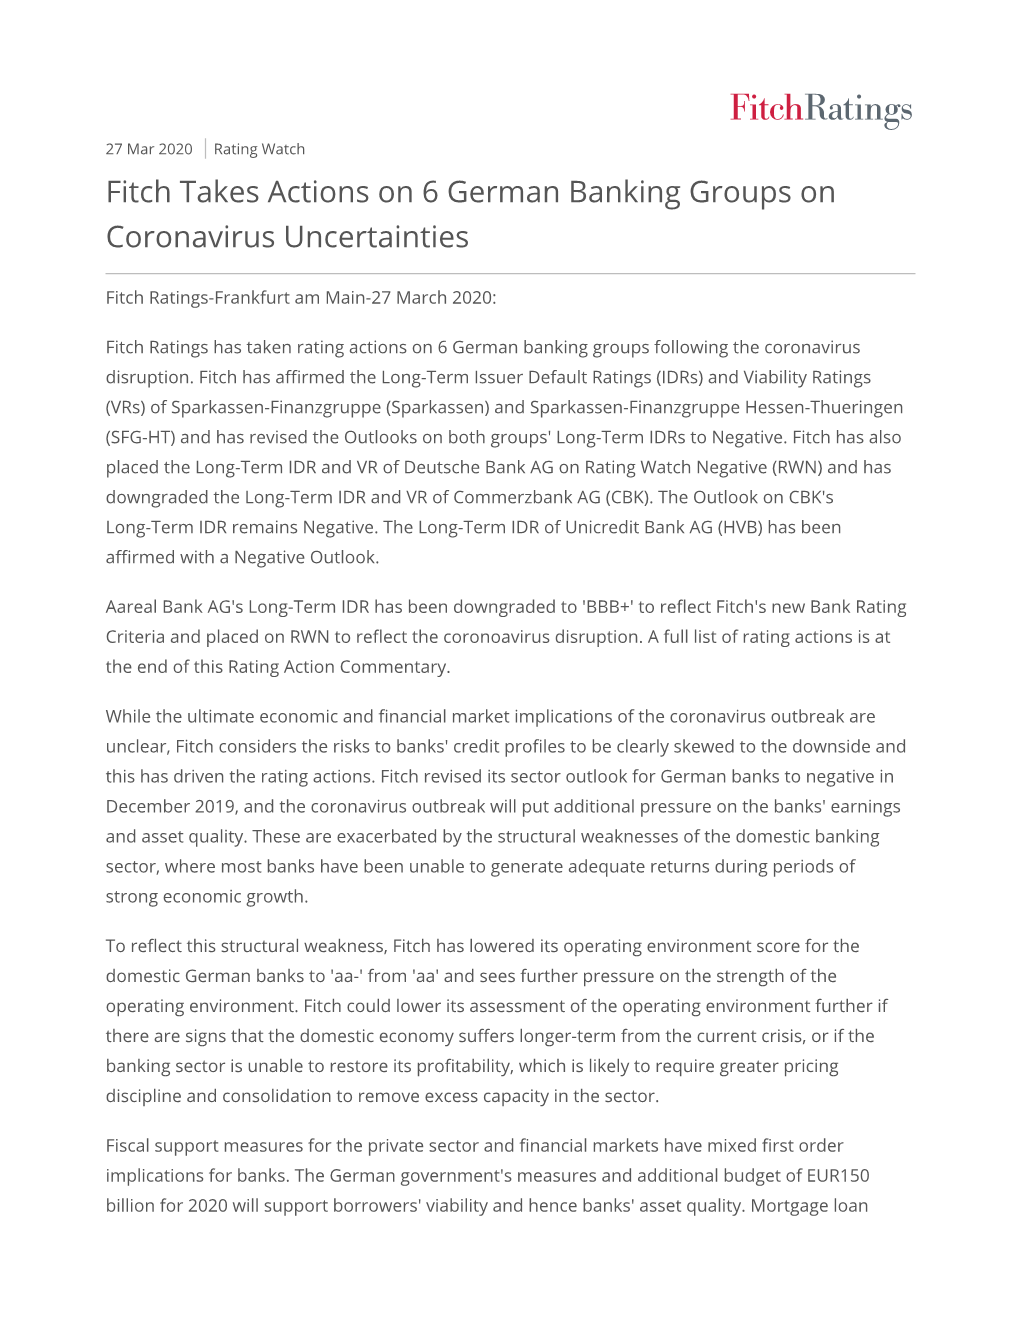 Fitch Takes Actions on 6 German Banking Groups on Coronavirus Uncertainties